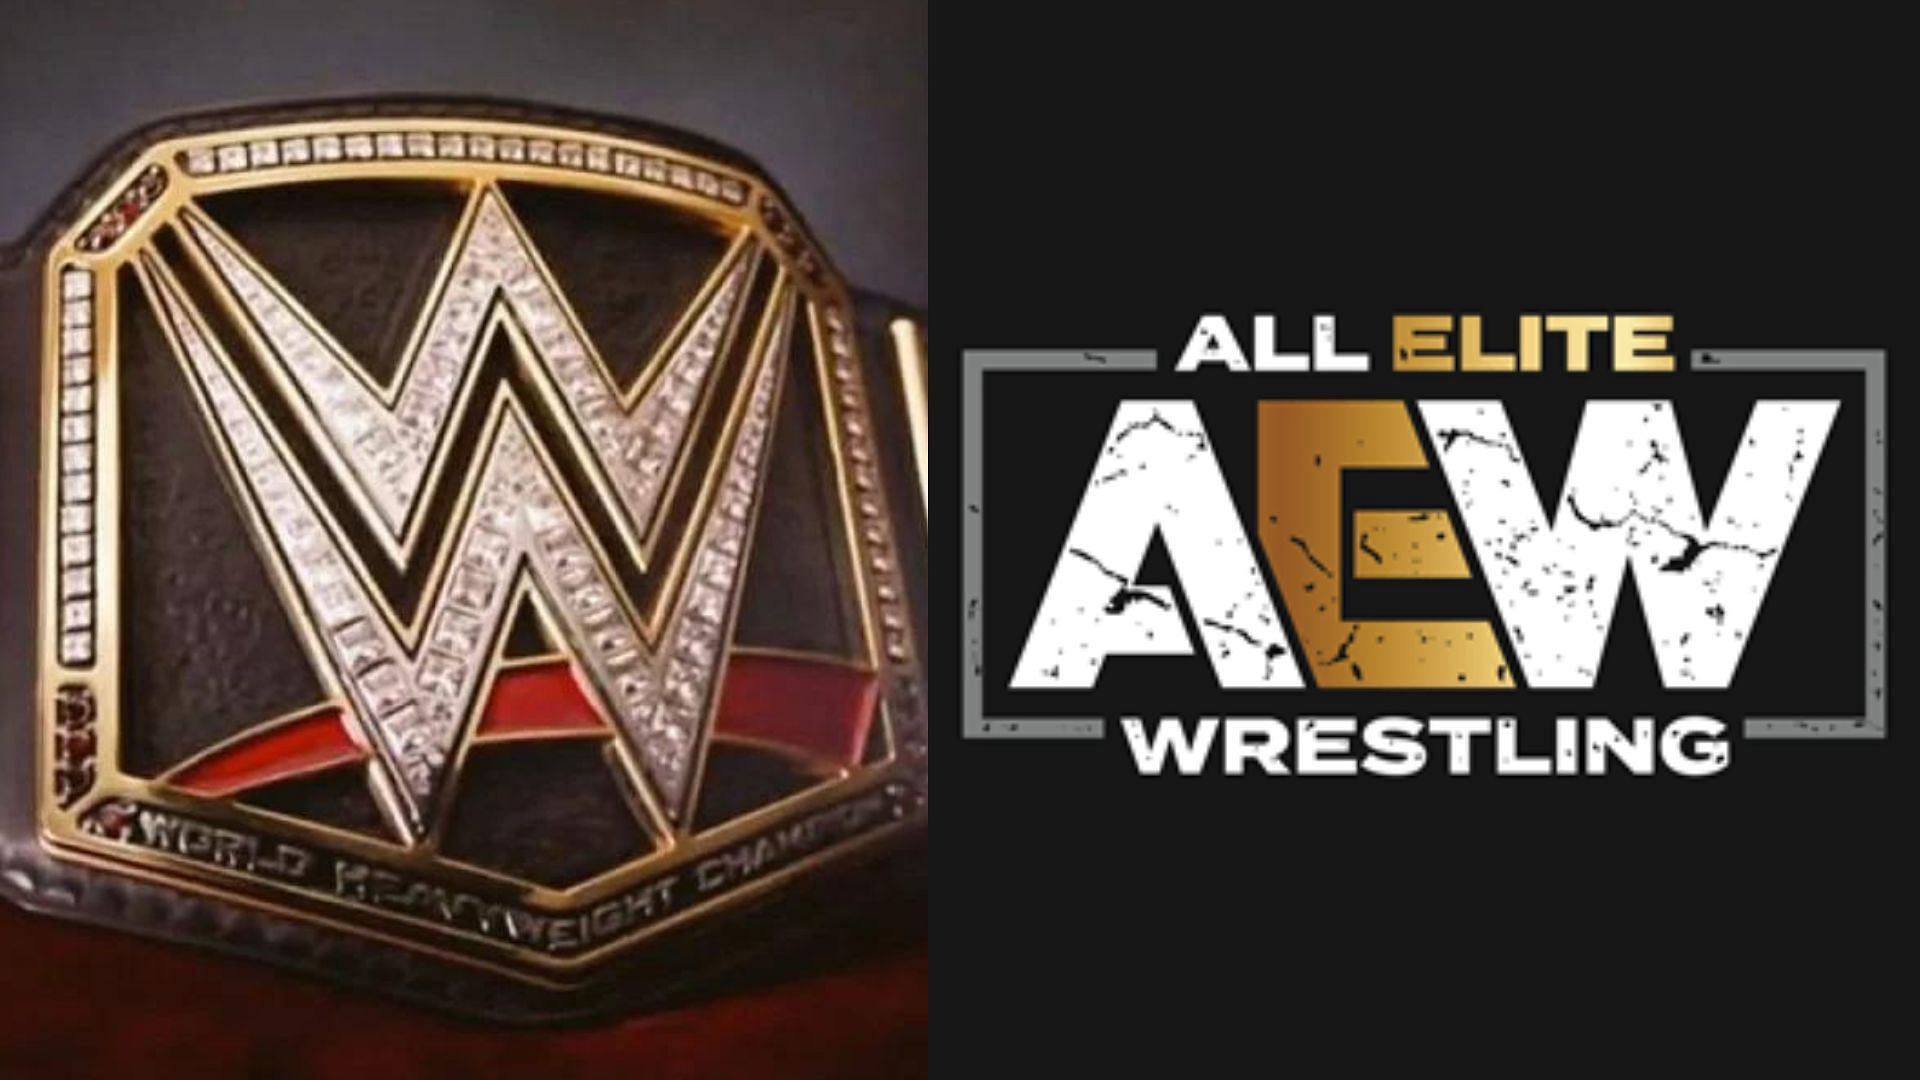 Former WWE Champion is set to return to AEW